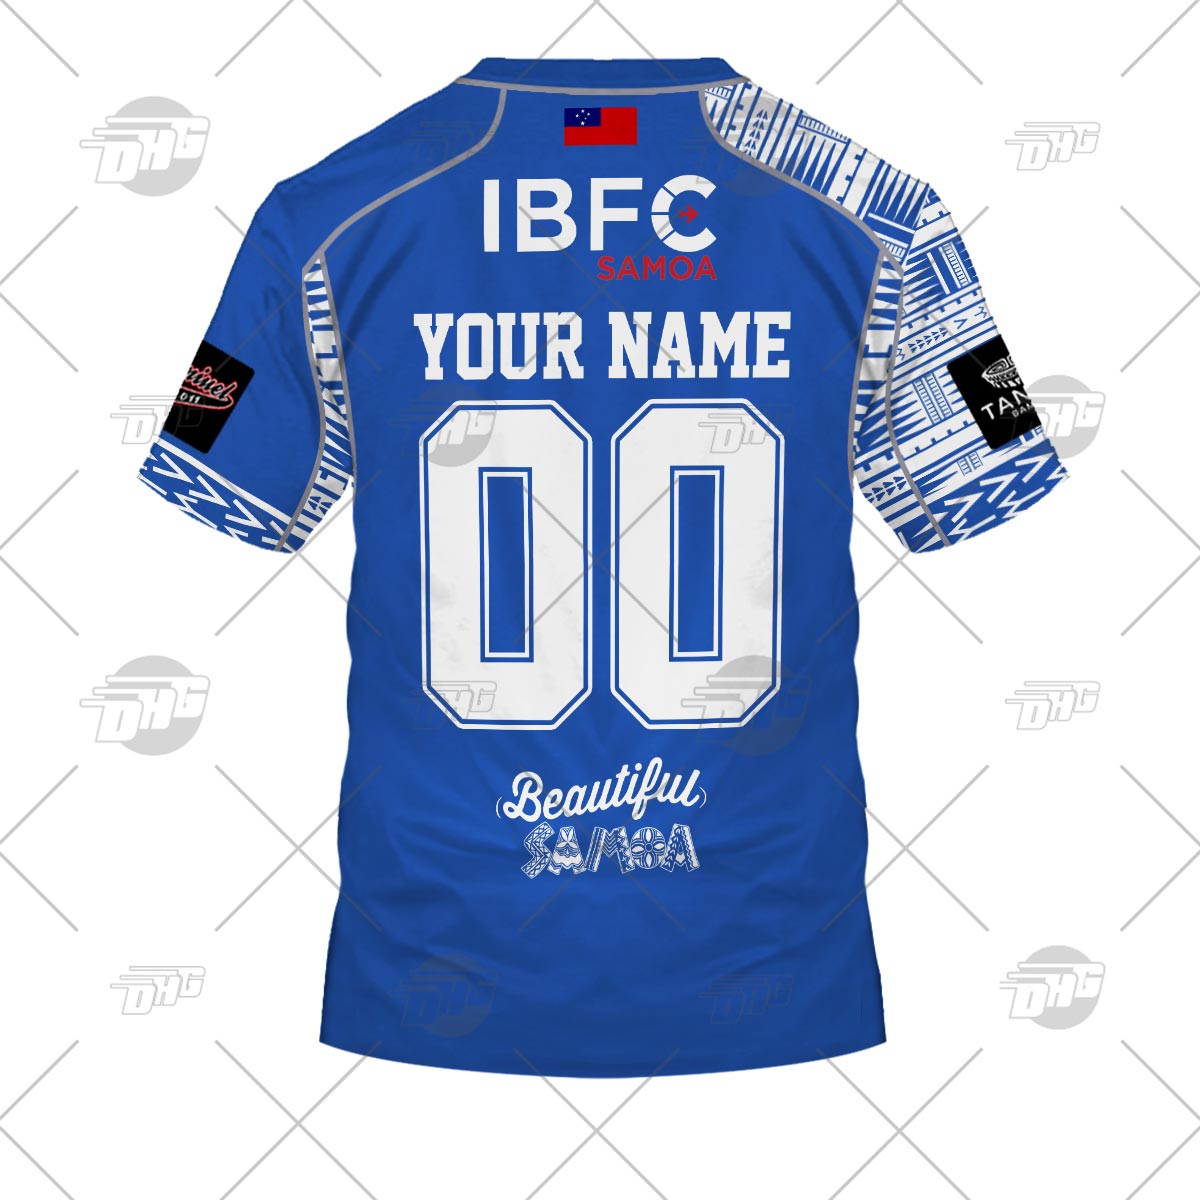 Personalized NHL Men's St. Louis Blues 2022 White Away Jersey -  OldSchoolThings - Personalize Your Own New & Retro Sports Jerseys, Hoodies,  T Shirts